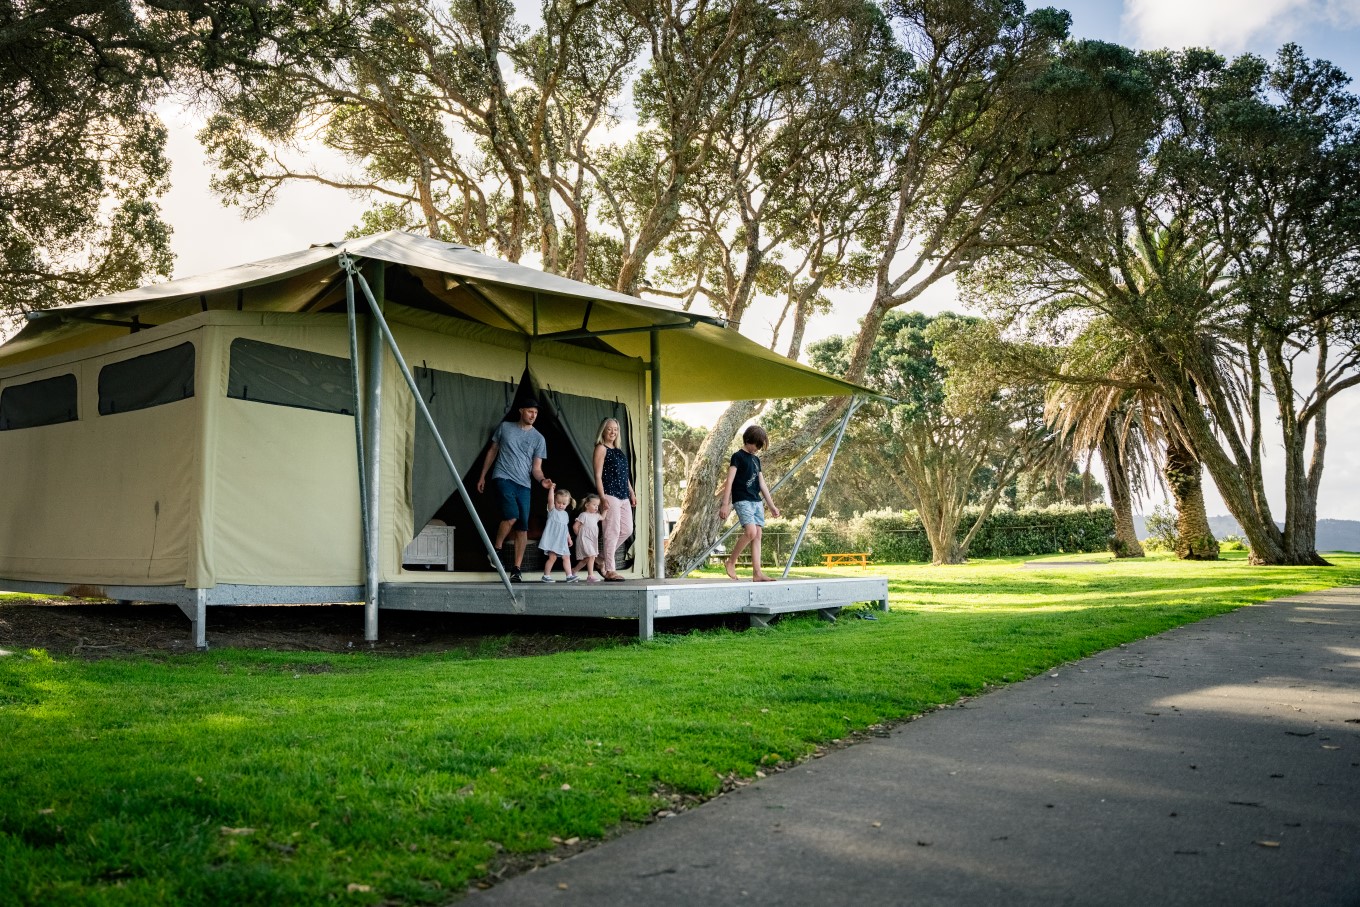 The deluxe eco-structure glamping tent at Ōrewa Beach Holiday Park has the Pacific Ocean outside its front door.